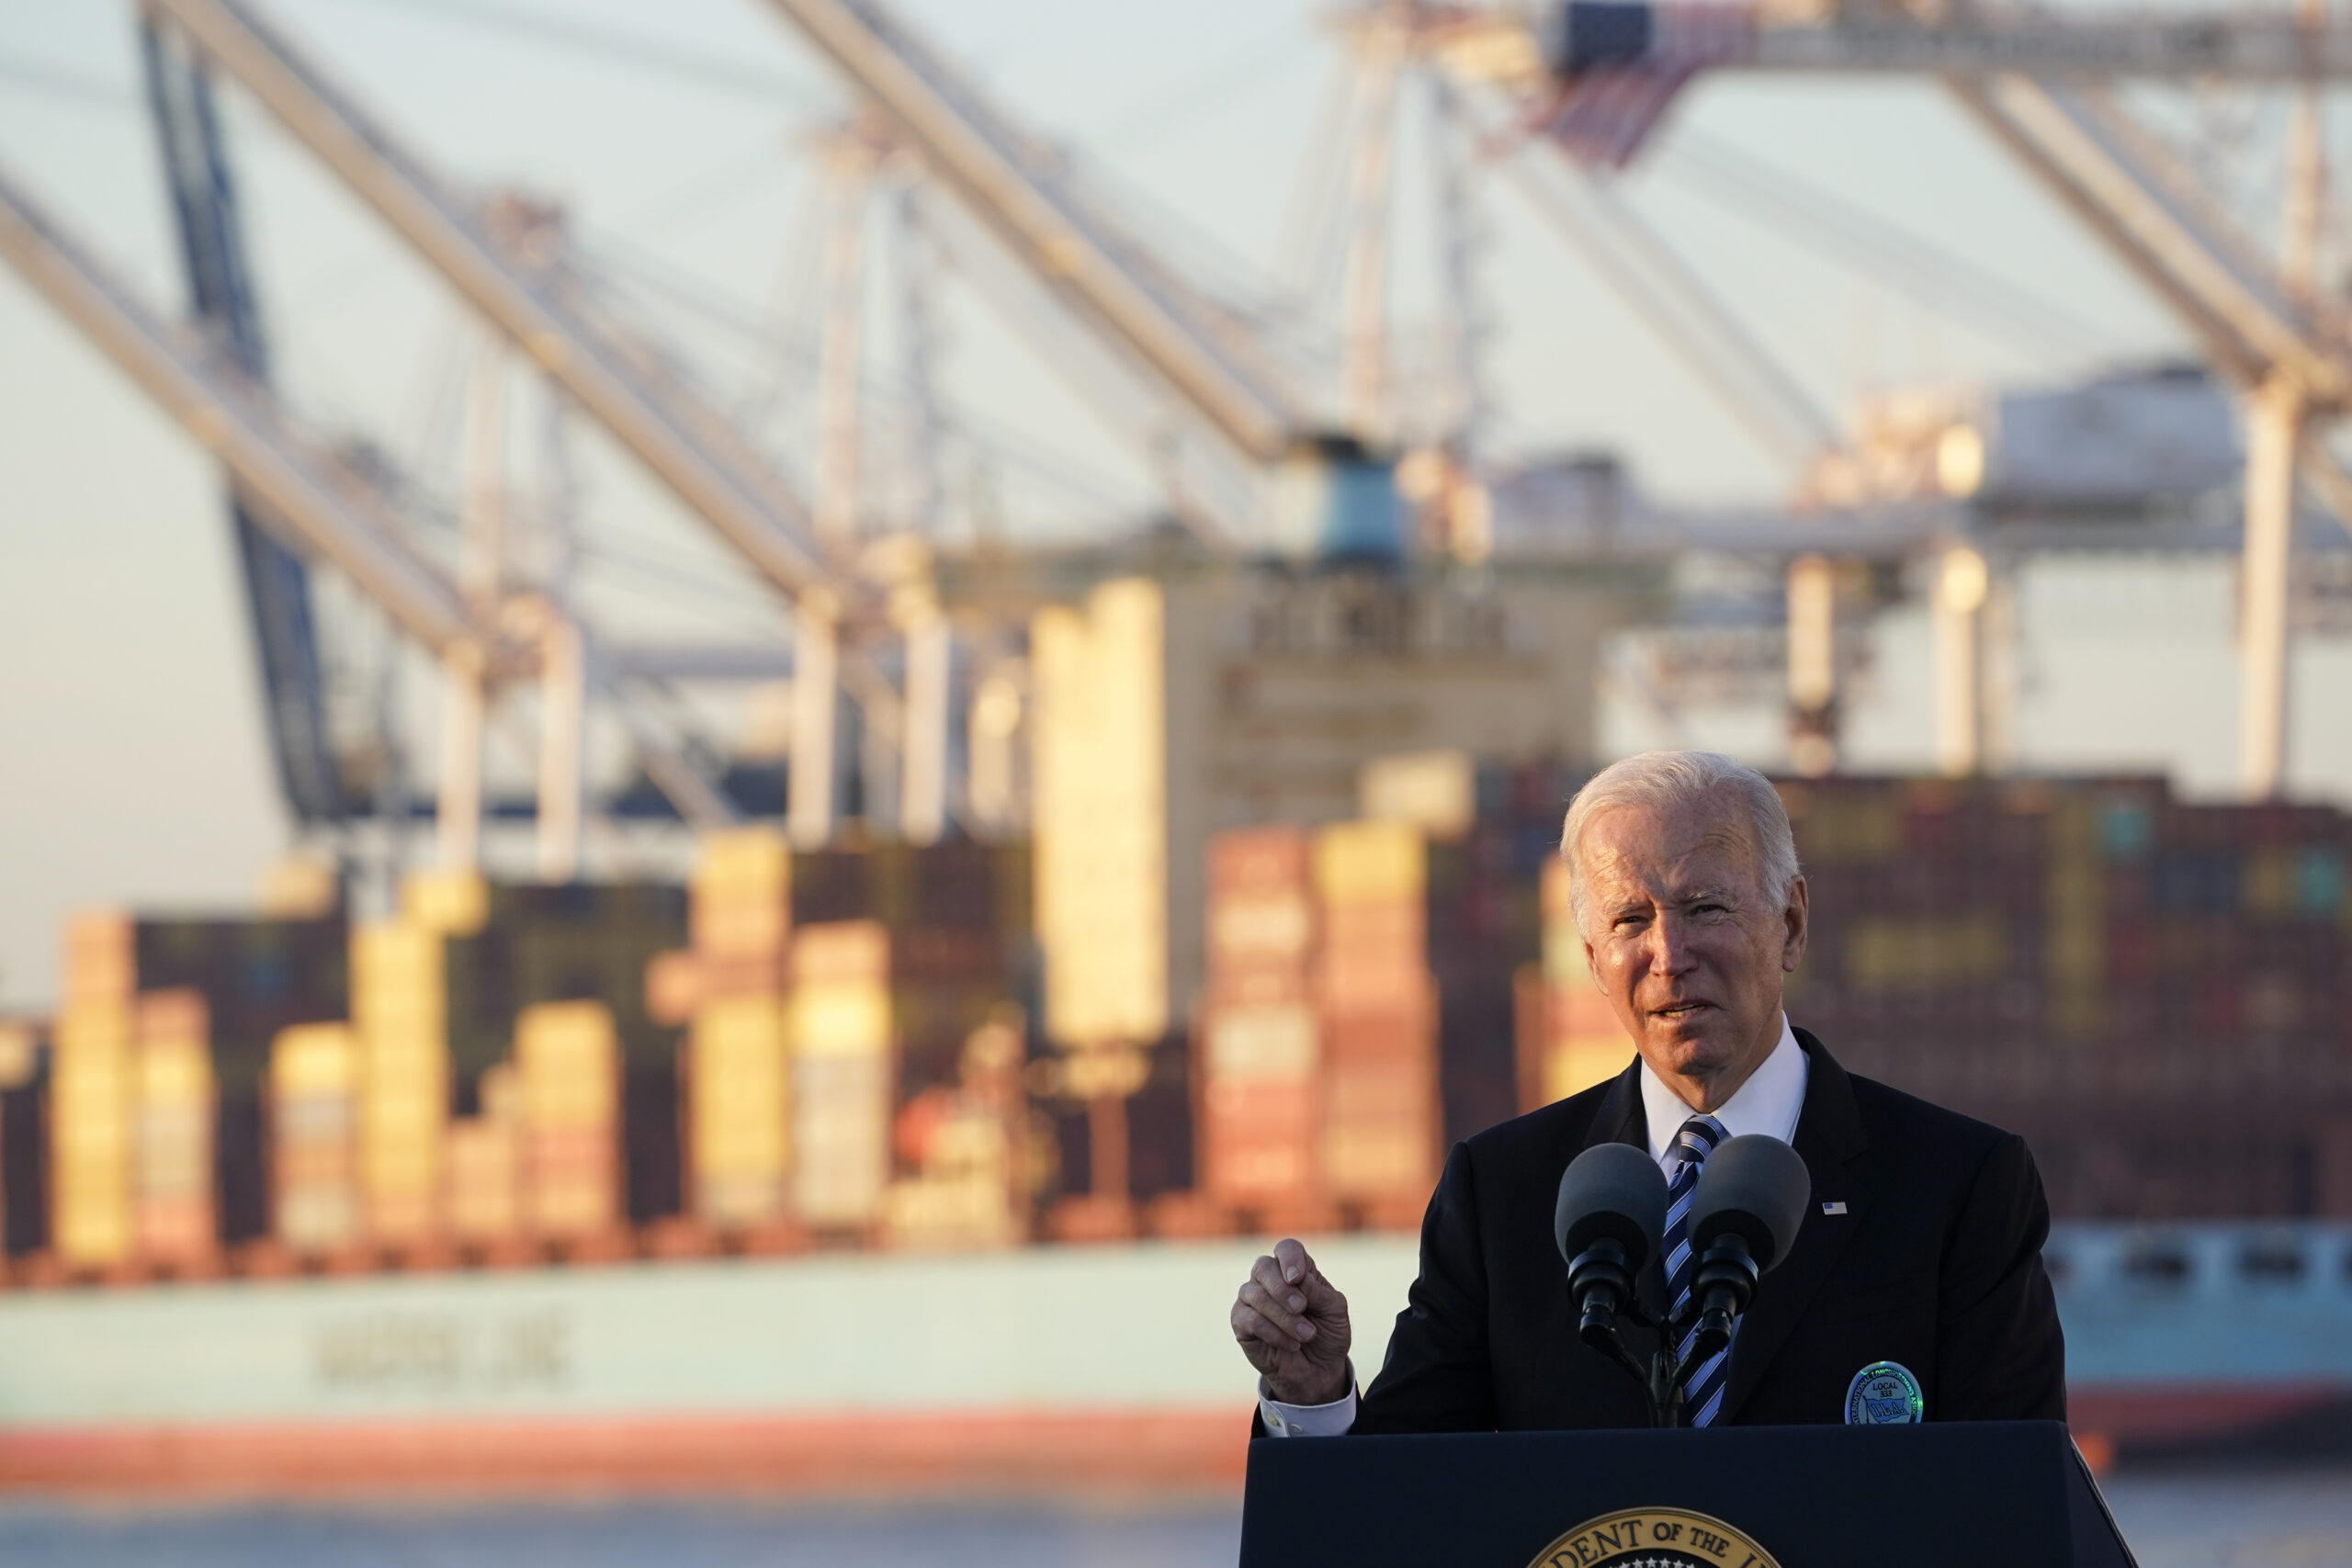 ‘Bidenomics’ is going global. The world is skeptical.